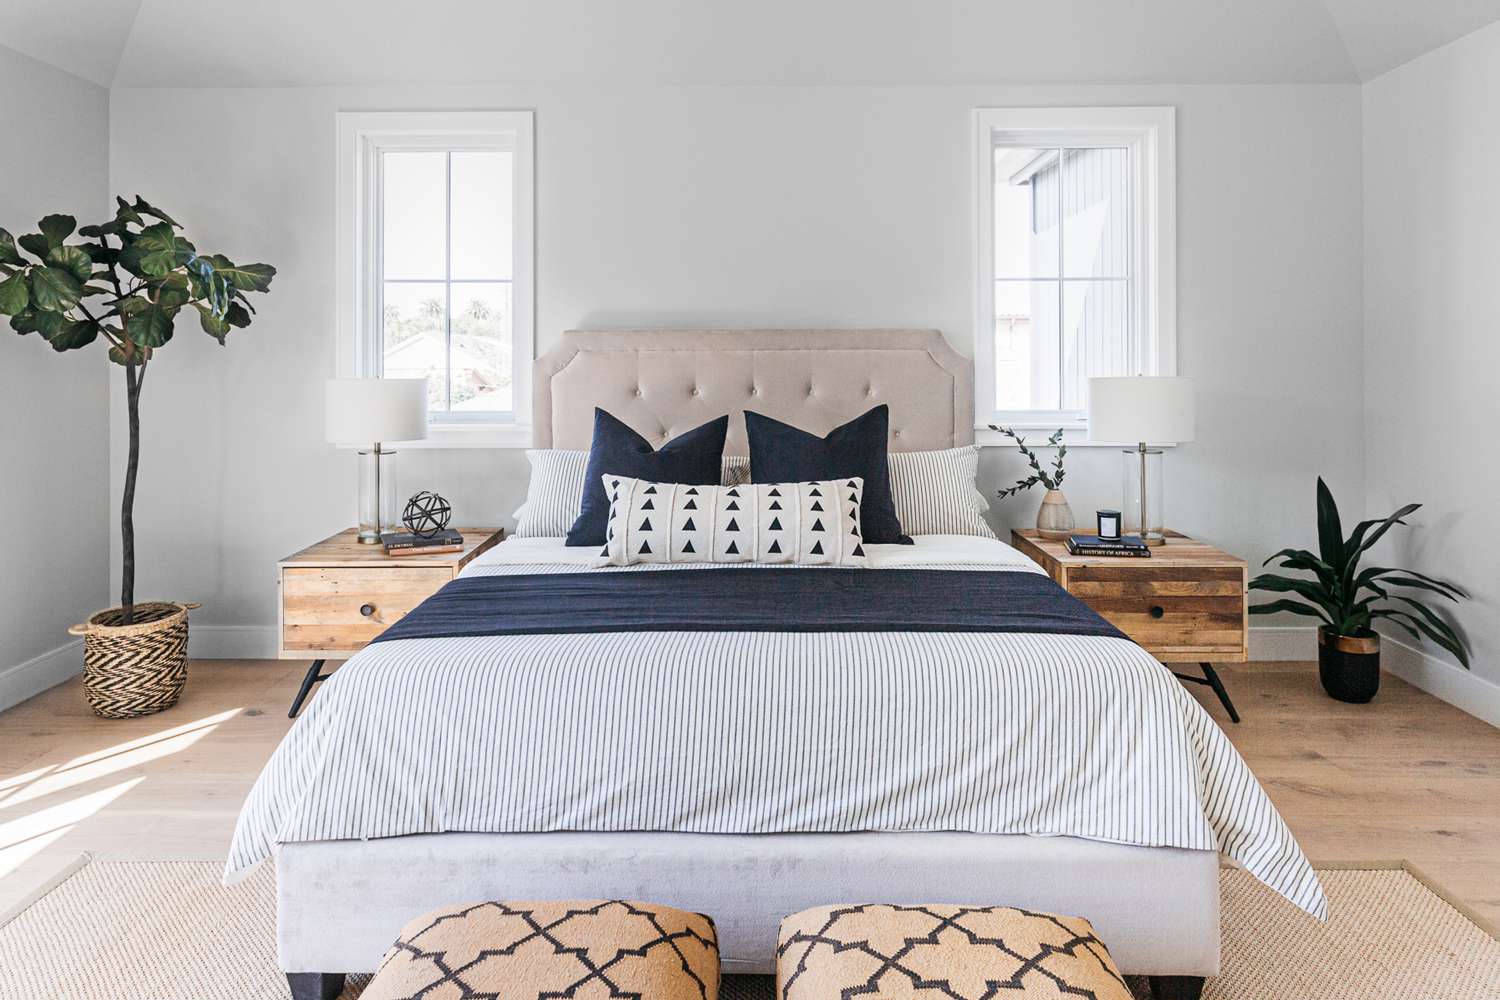 What Color Bedding Makes A Bedroom Look Bigger?